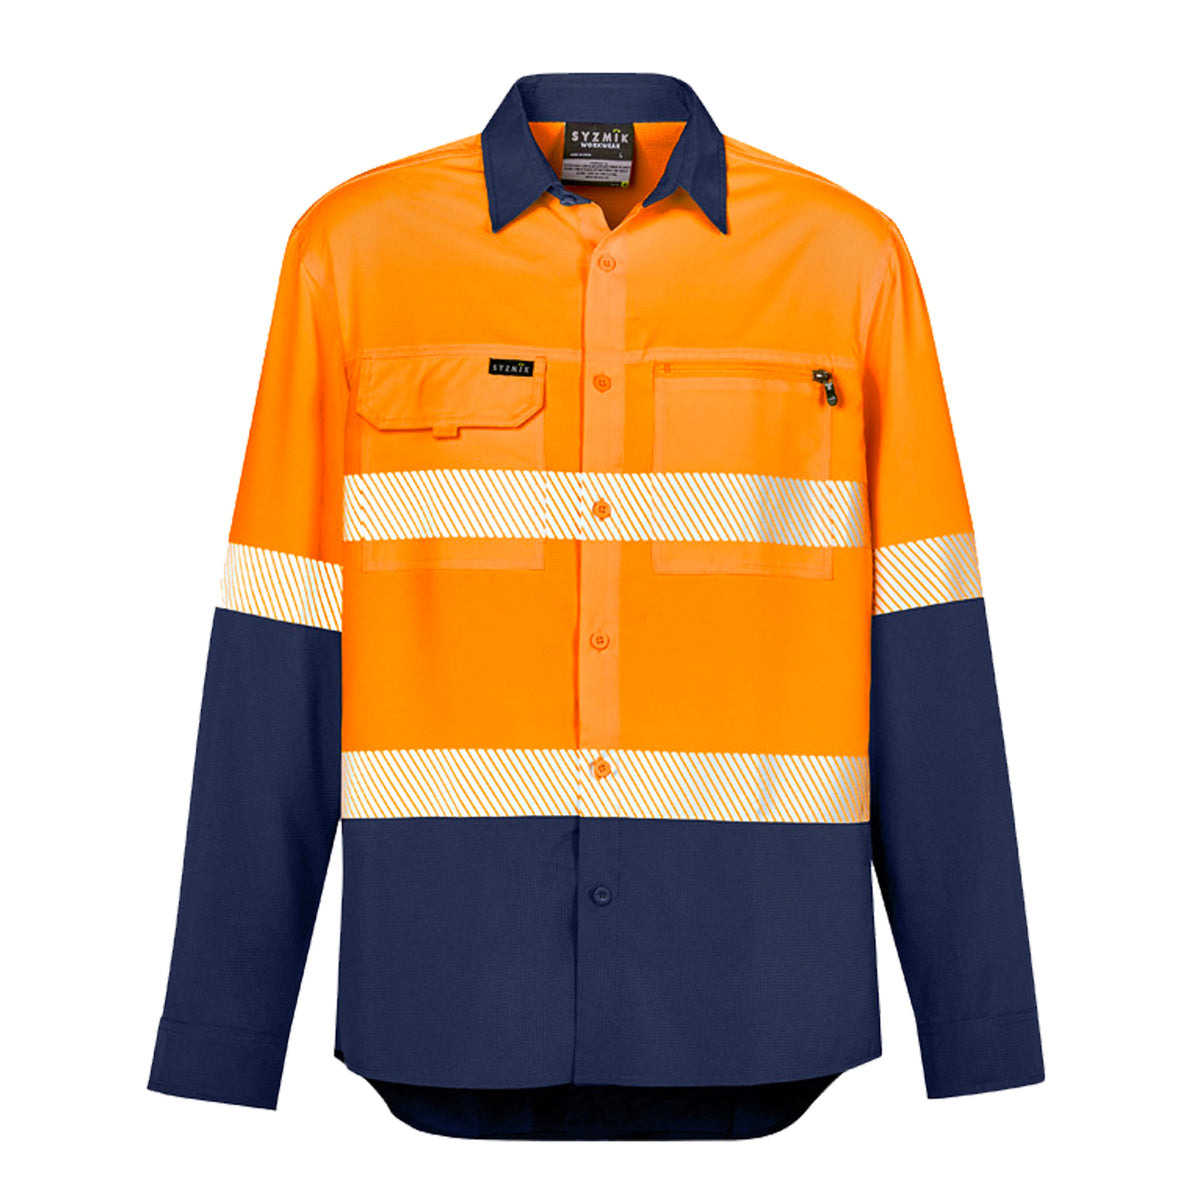 syzmik outdoor long sleeve shirt with segmented tape in orange navy